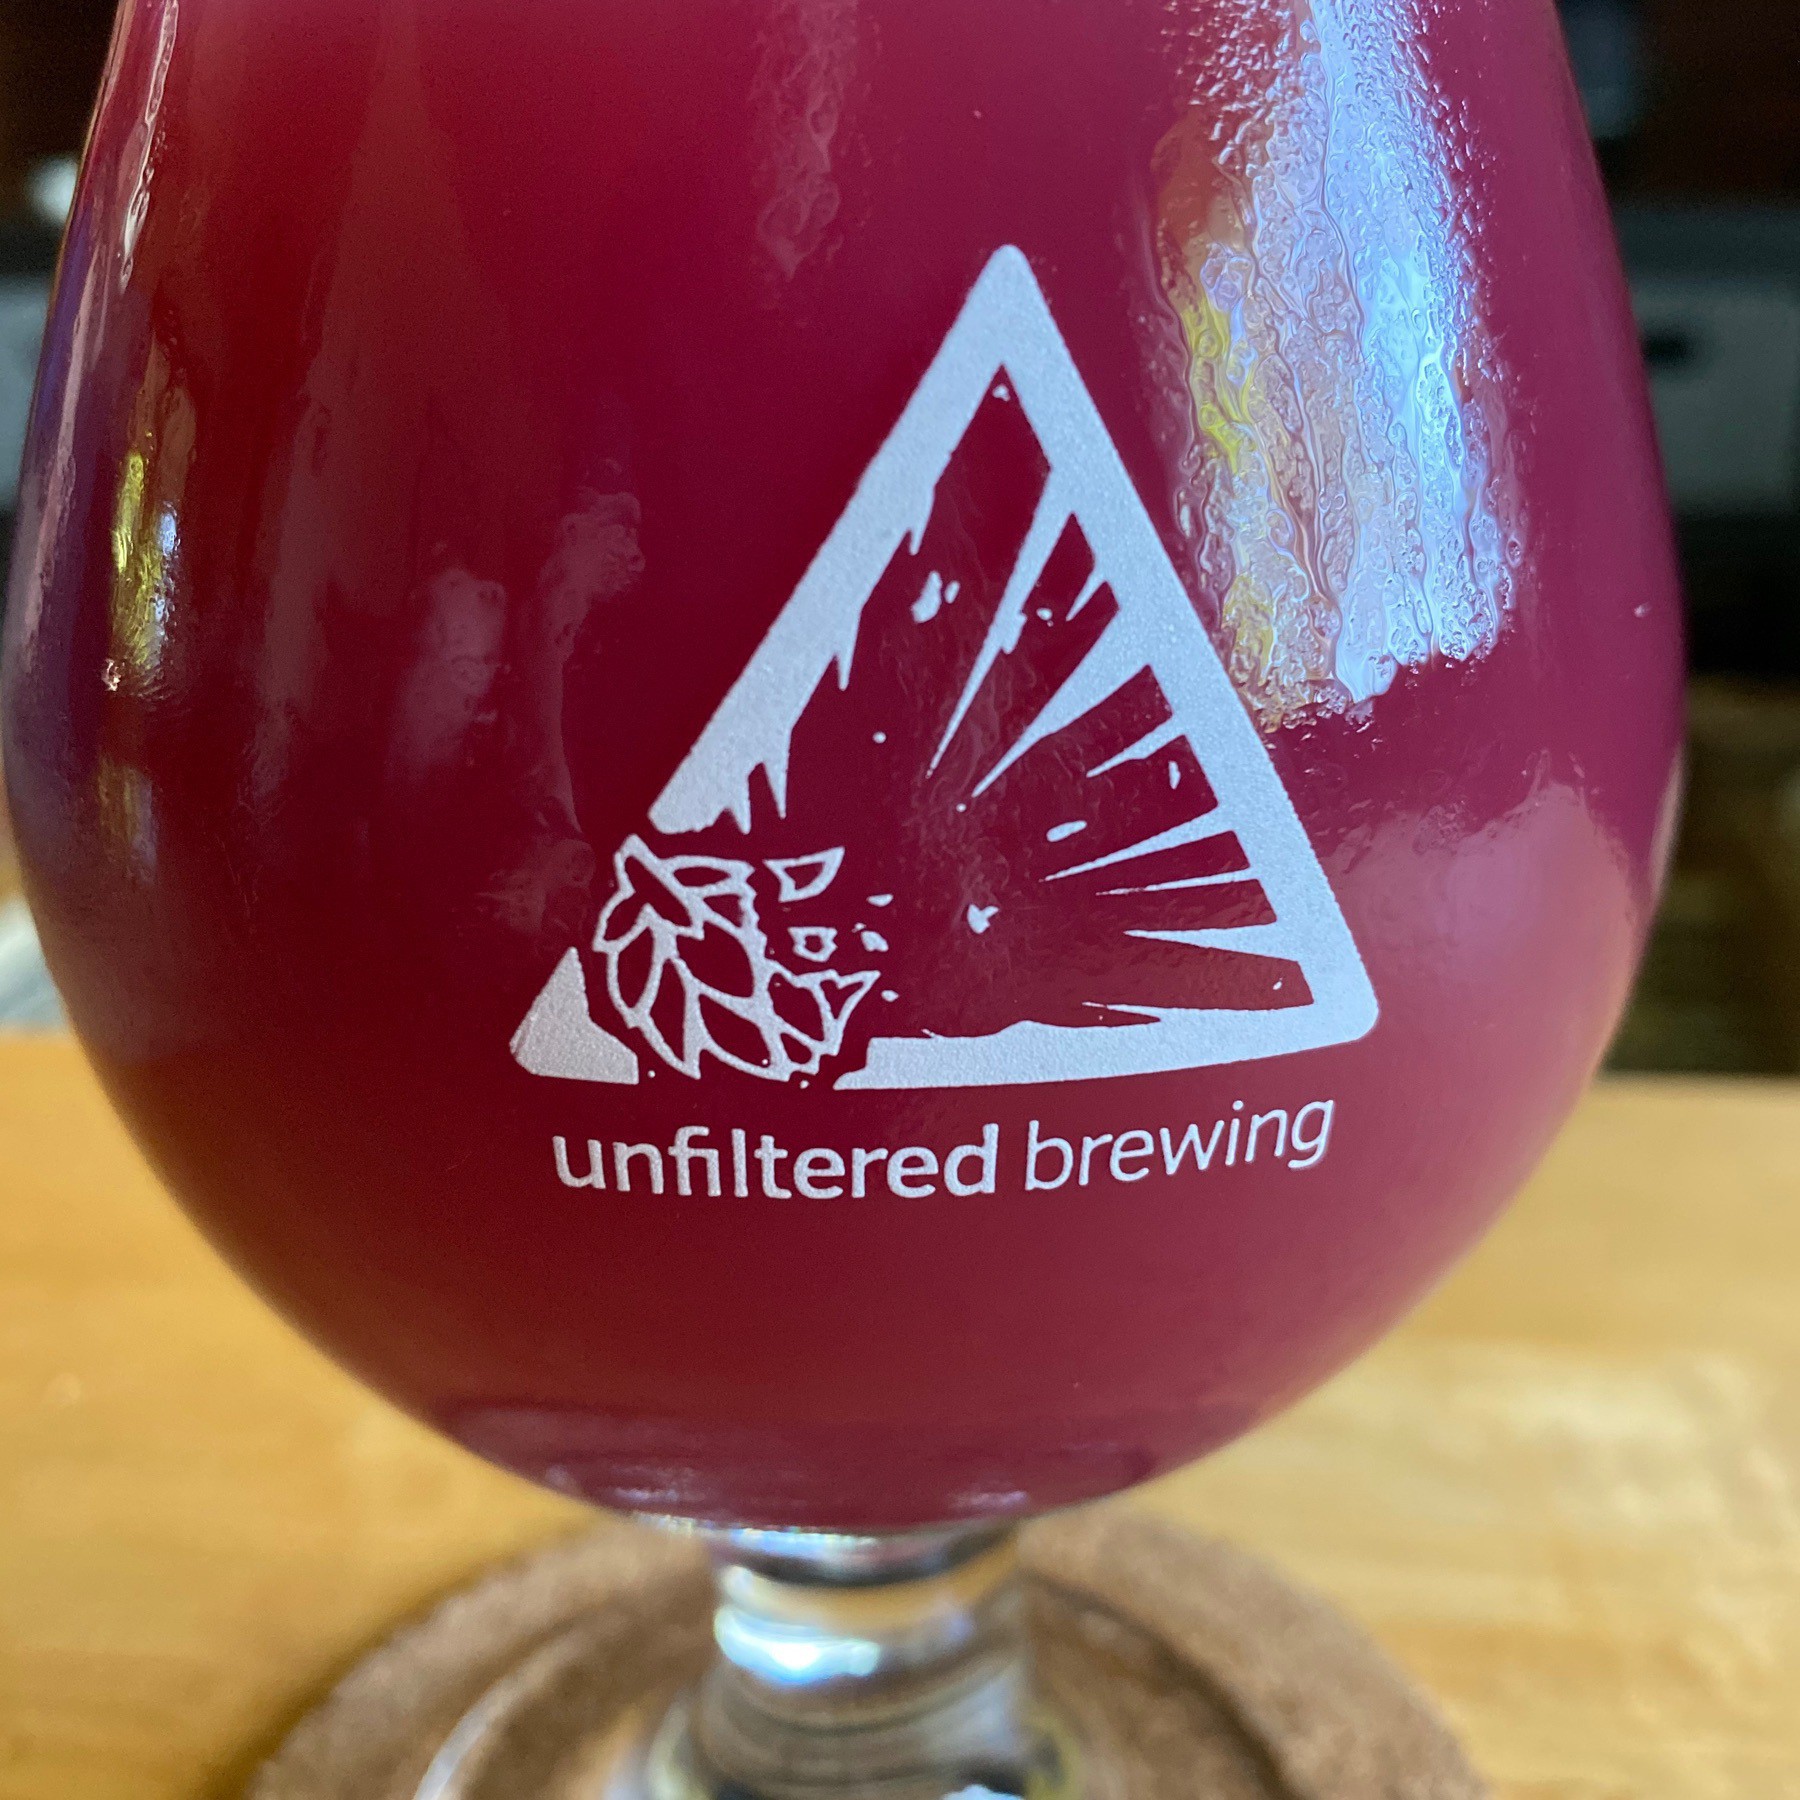 Blueberry beer in glass.